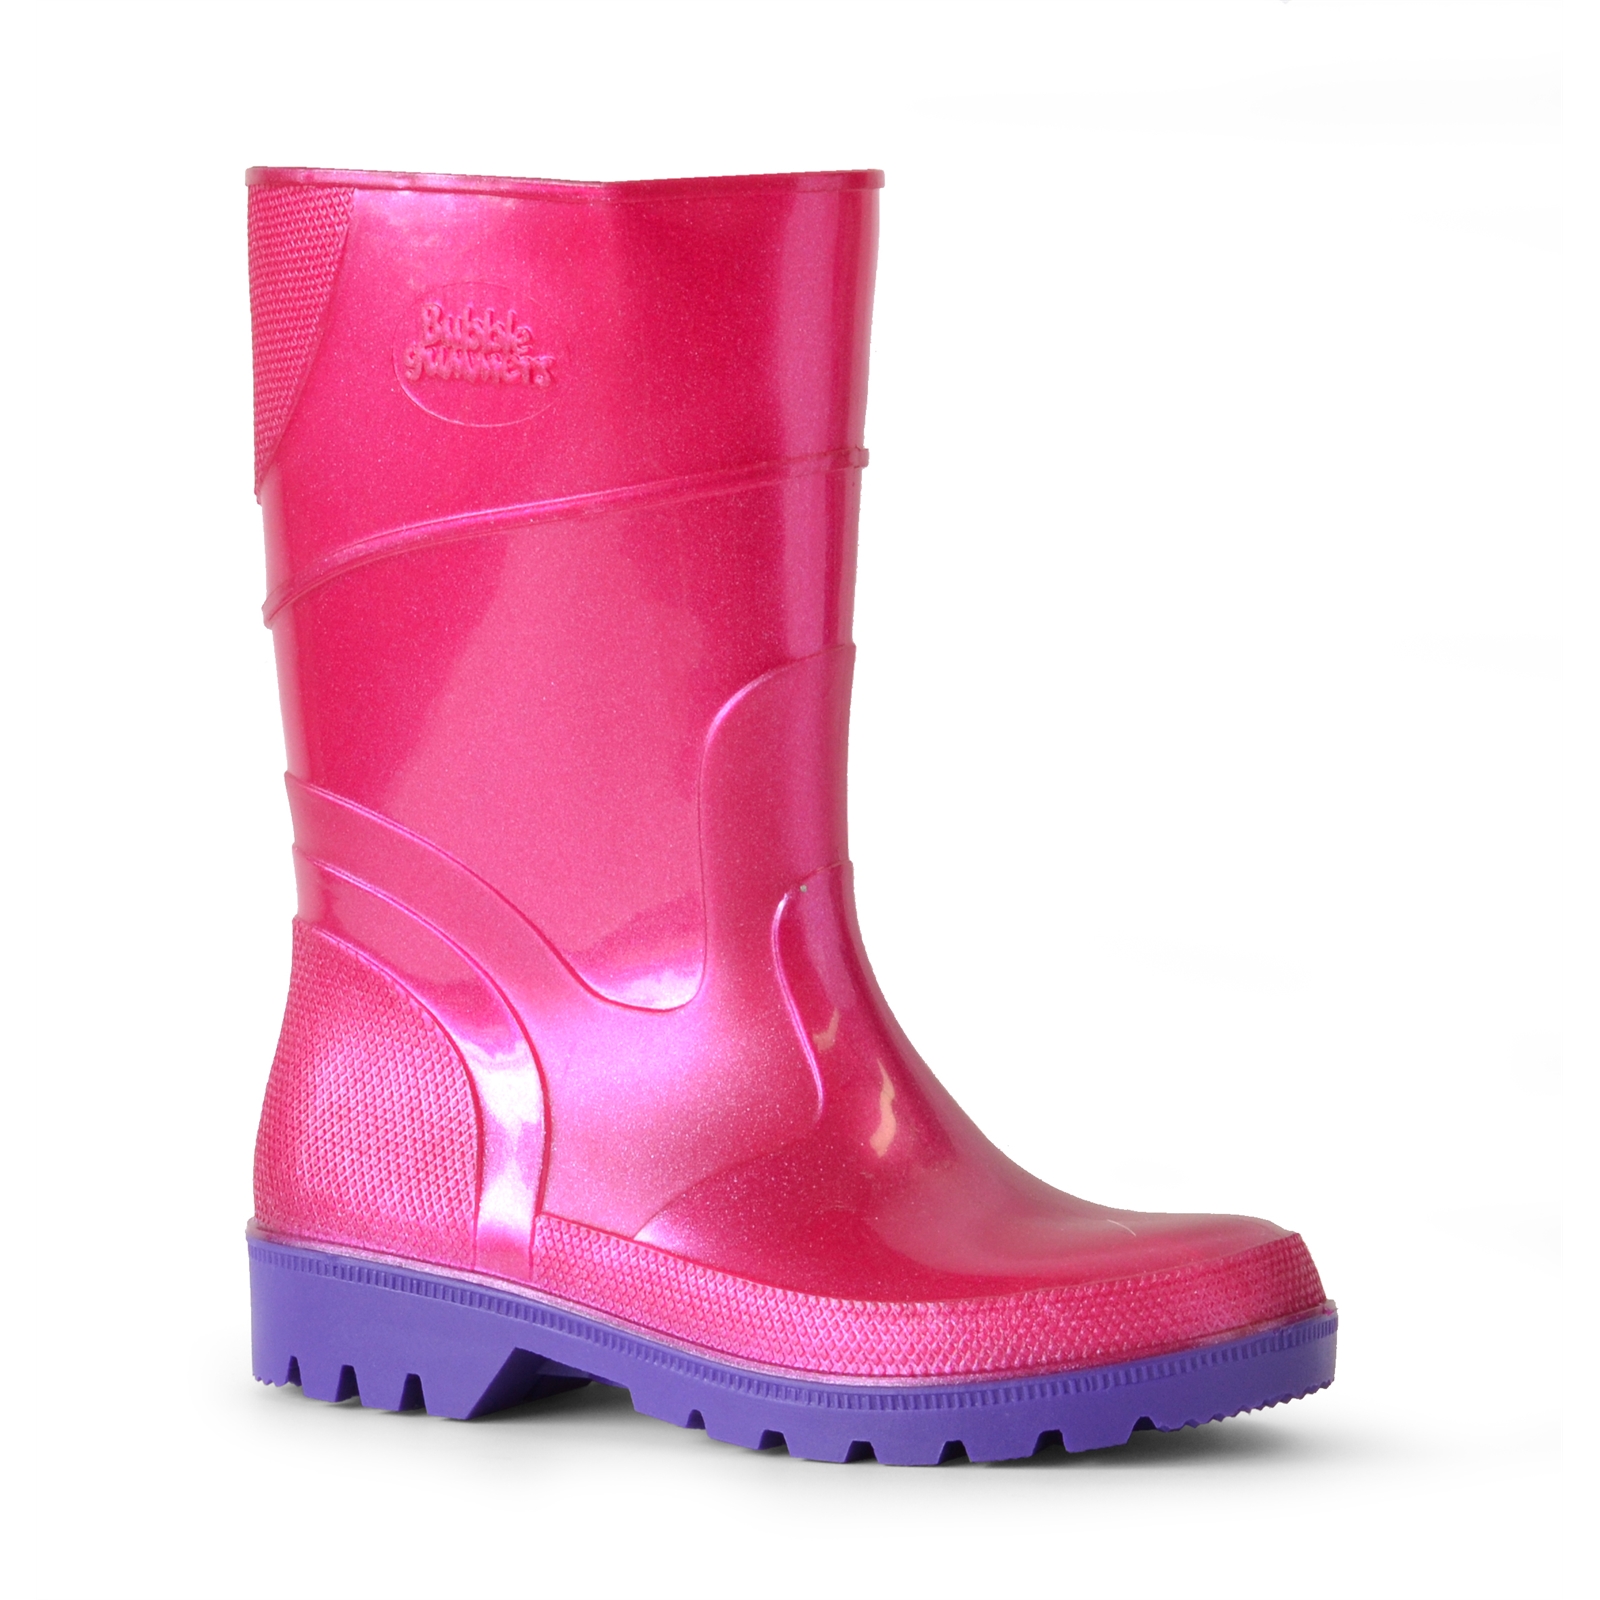 baby gumboots size 4